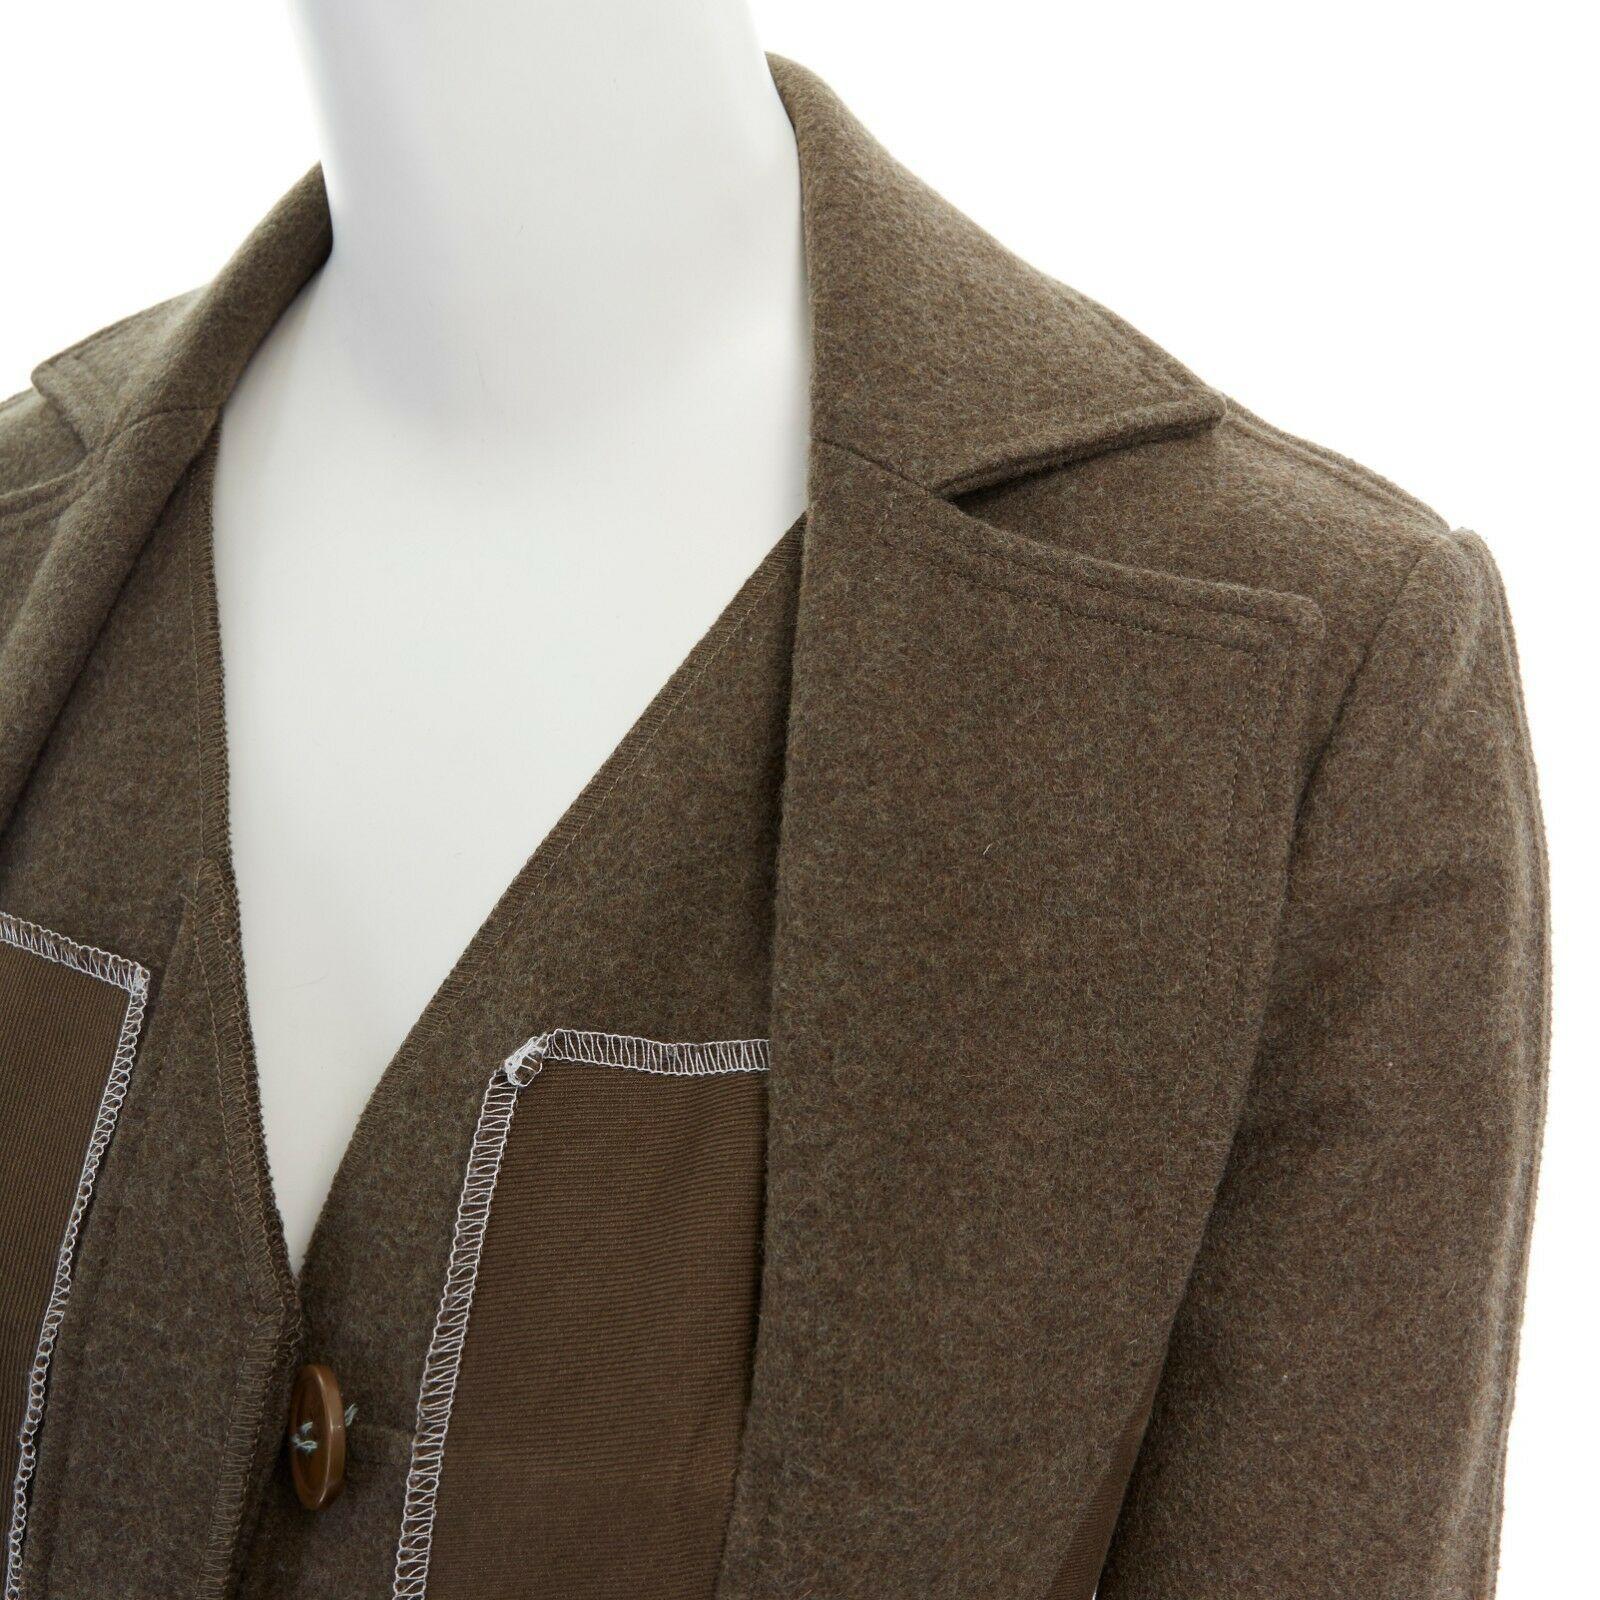 CHRISTIAN DIOR Galliano green reverse constructed exposed seams jacket FR36 S
CHRISTIAN DIOR by JOHN GALLIANO
Wool, alpaca, cotton, metal. 
Khaki green. 
Reversed constructed jacket. 
Contrast white stitched seams. 
Patchwork detail. 
Button front